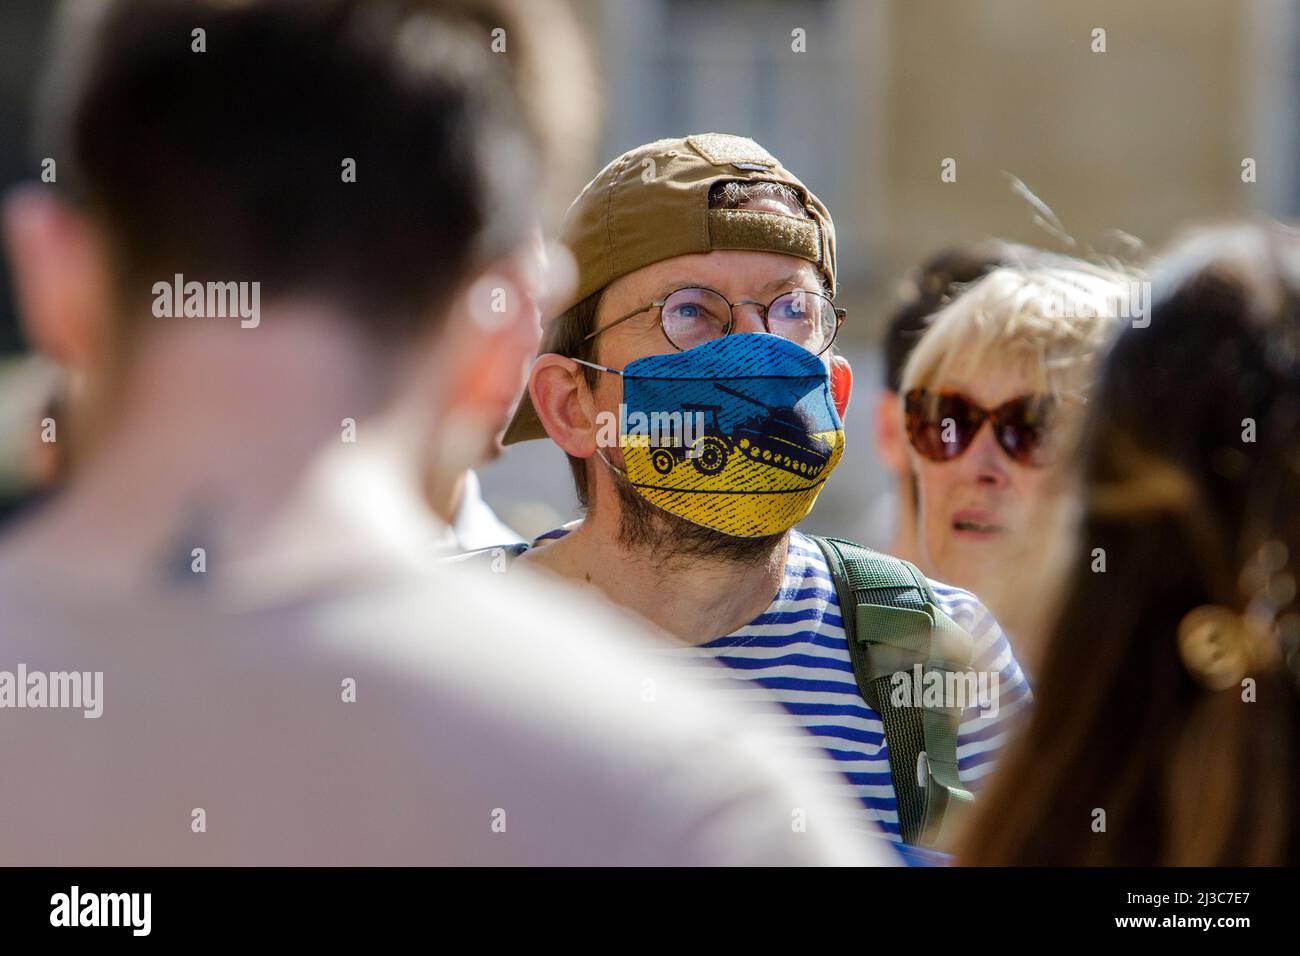 Protesters outside Bath Abbey hold anti-war placards and Ukrainian flags as they take part in a demonstration against Russia's invasion of Ukraine Stock Photo